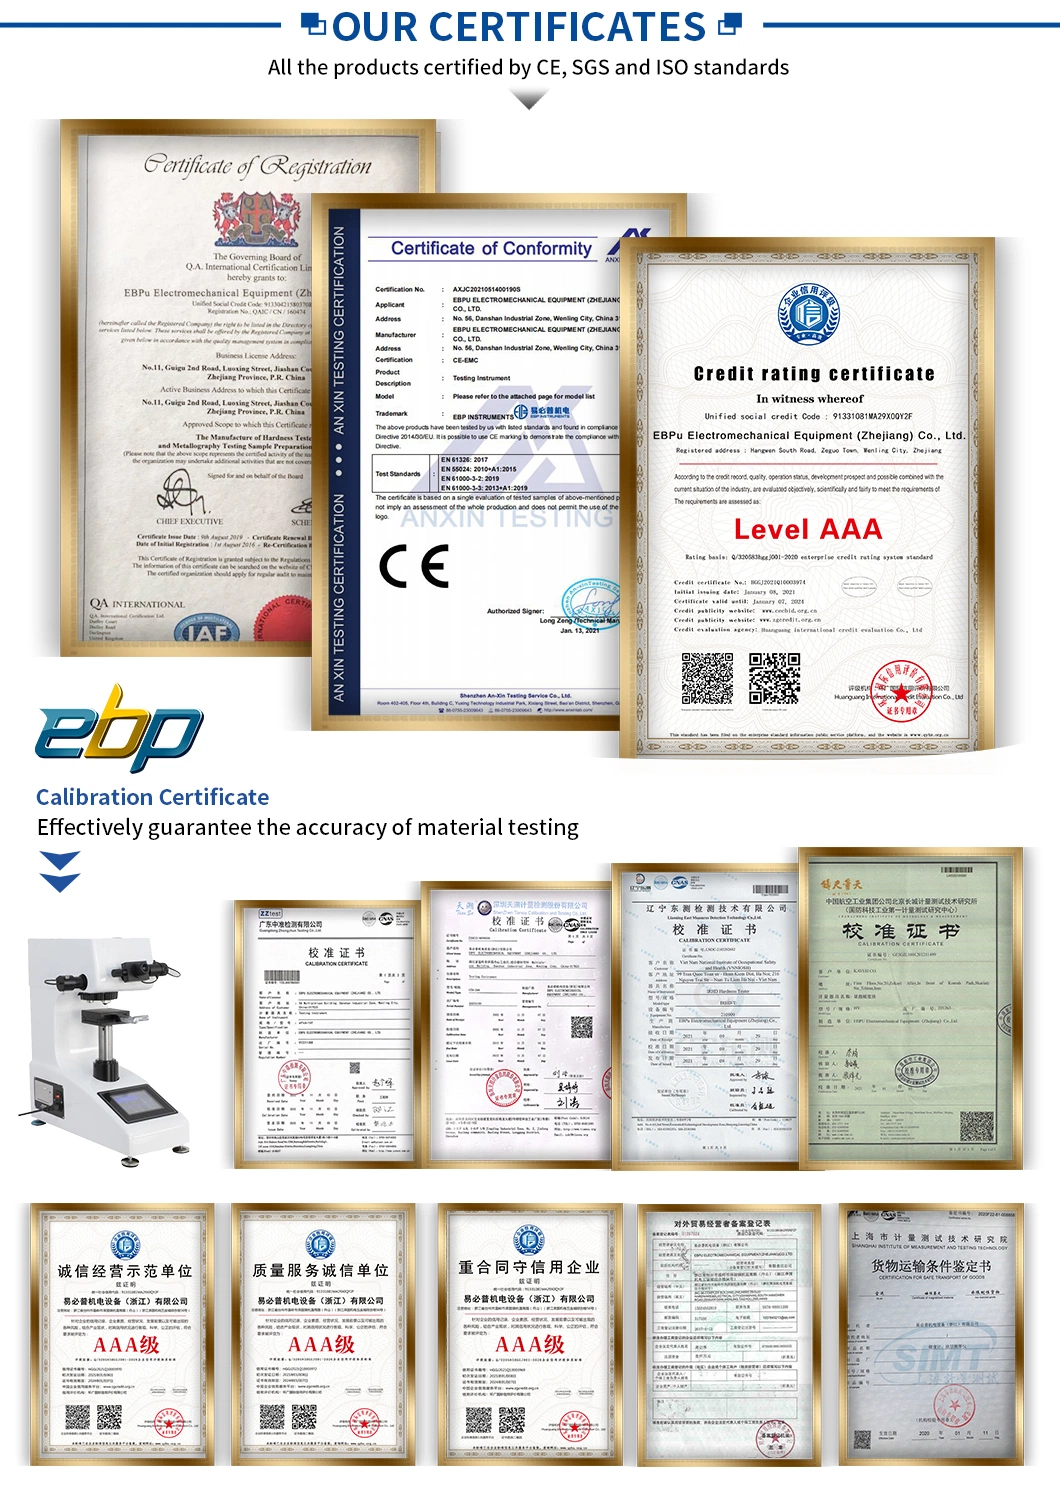 High Guiding Accuracy Vickers Hardness Measuring Instruments with CE Certification